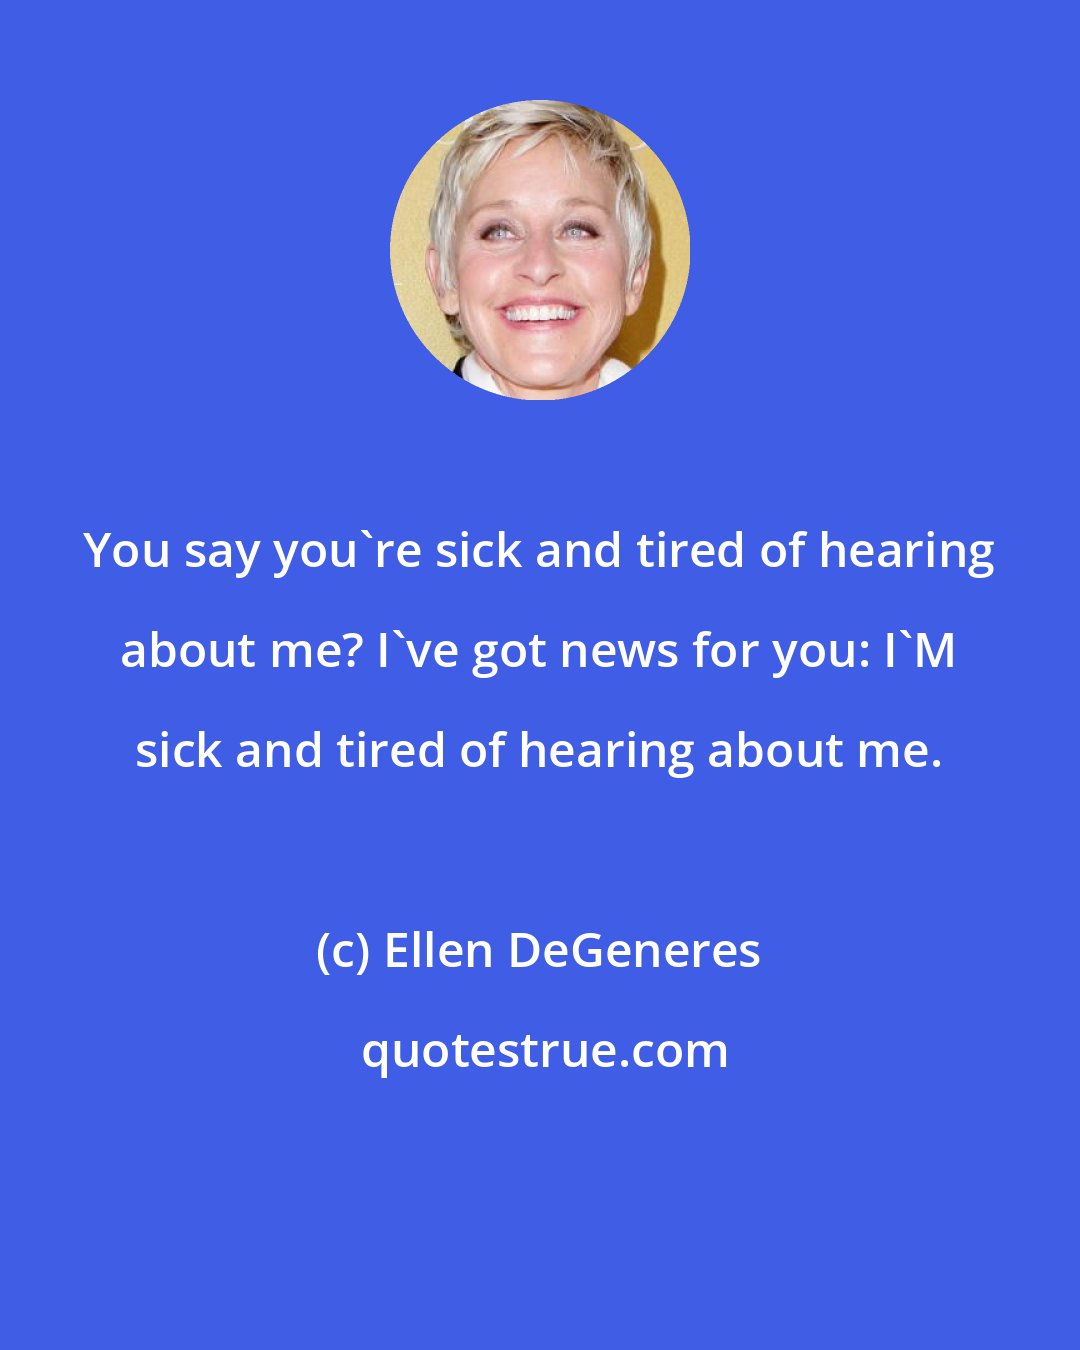 Ellen DeGeneres: You say you're sick and tired of hearing about me? I've got news for you: I'M sick and tired of hearing about me.